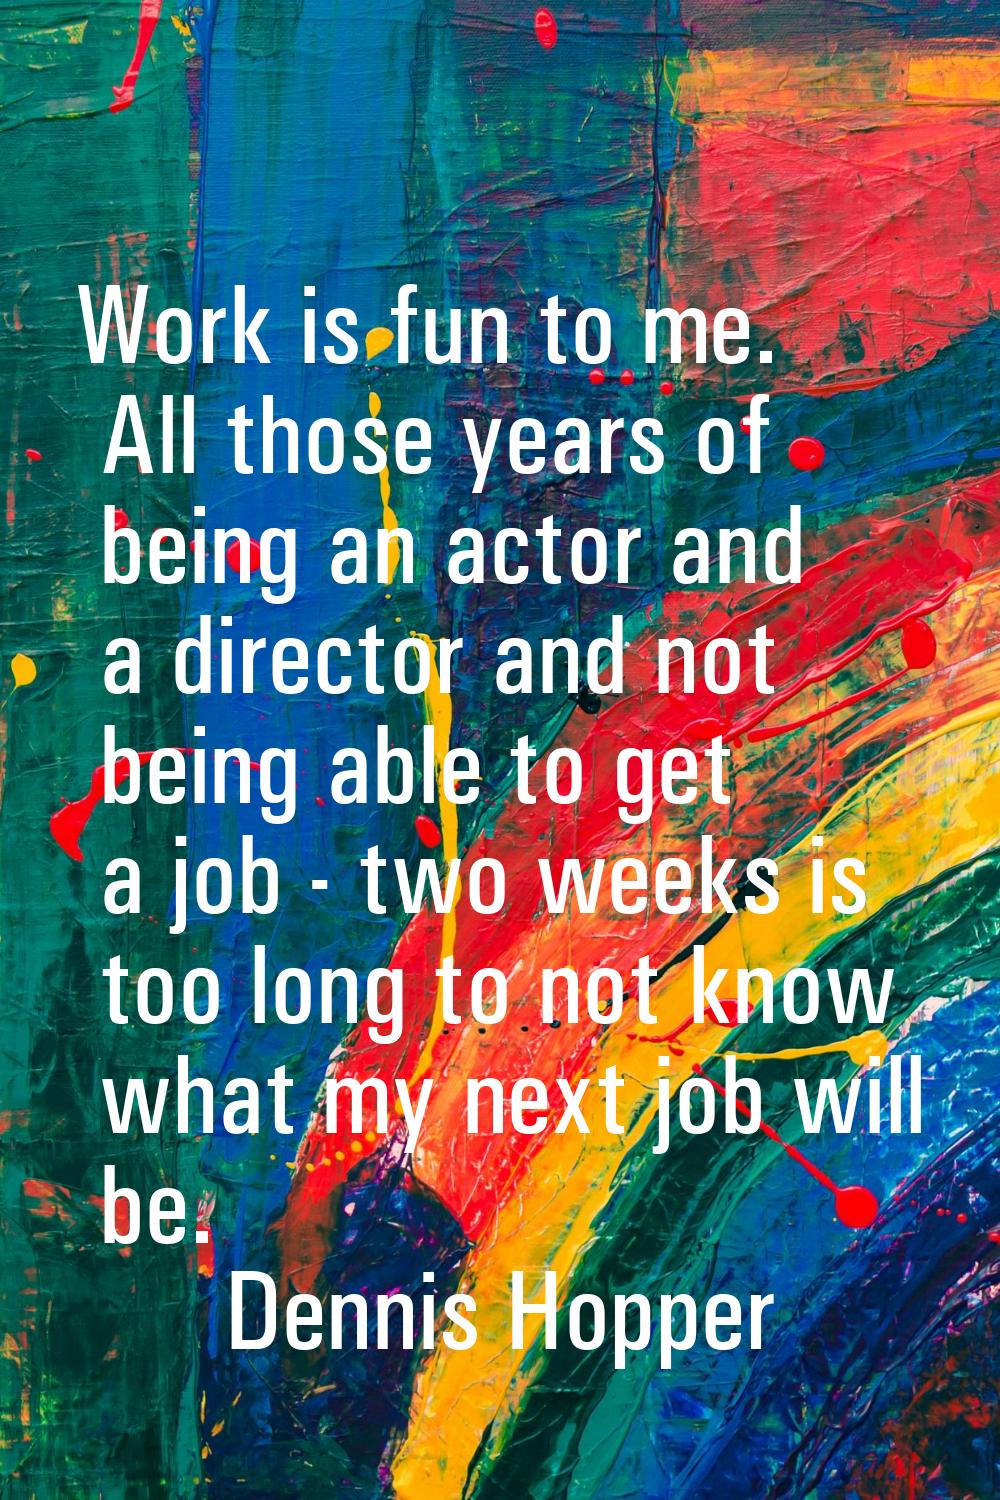 Work is fun to me. All those years of being an actor and a director and not being able to get a job